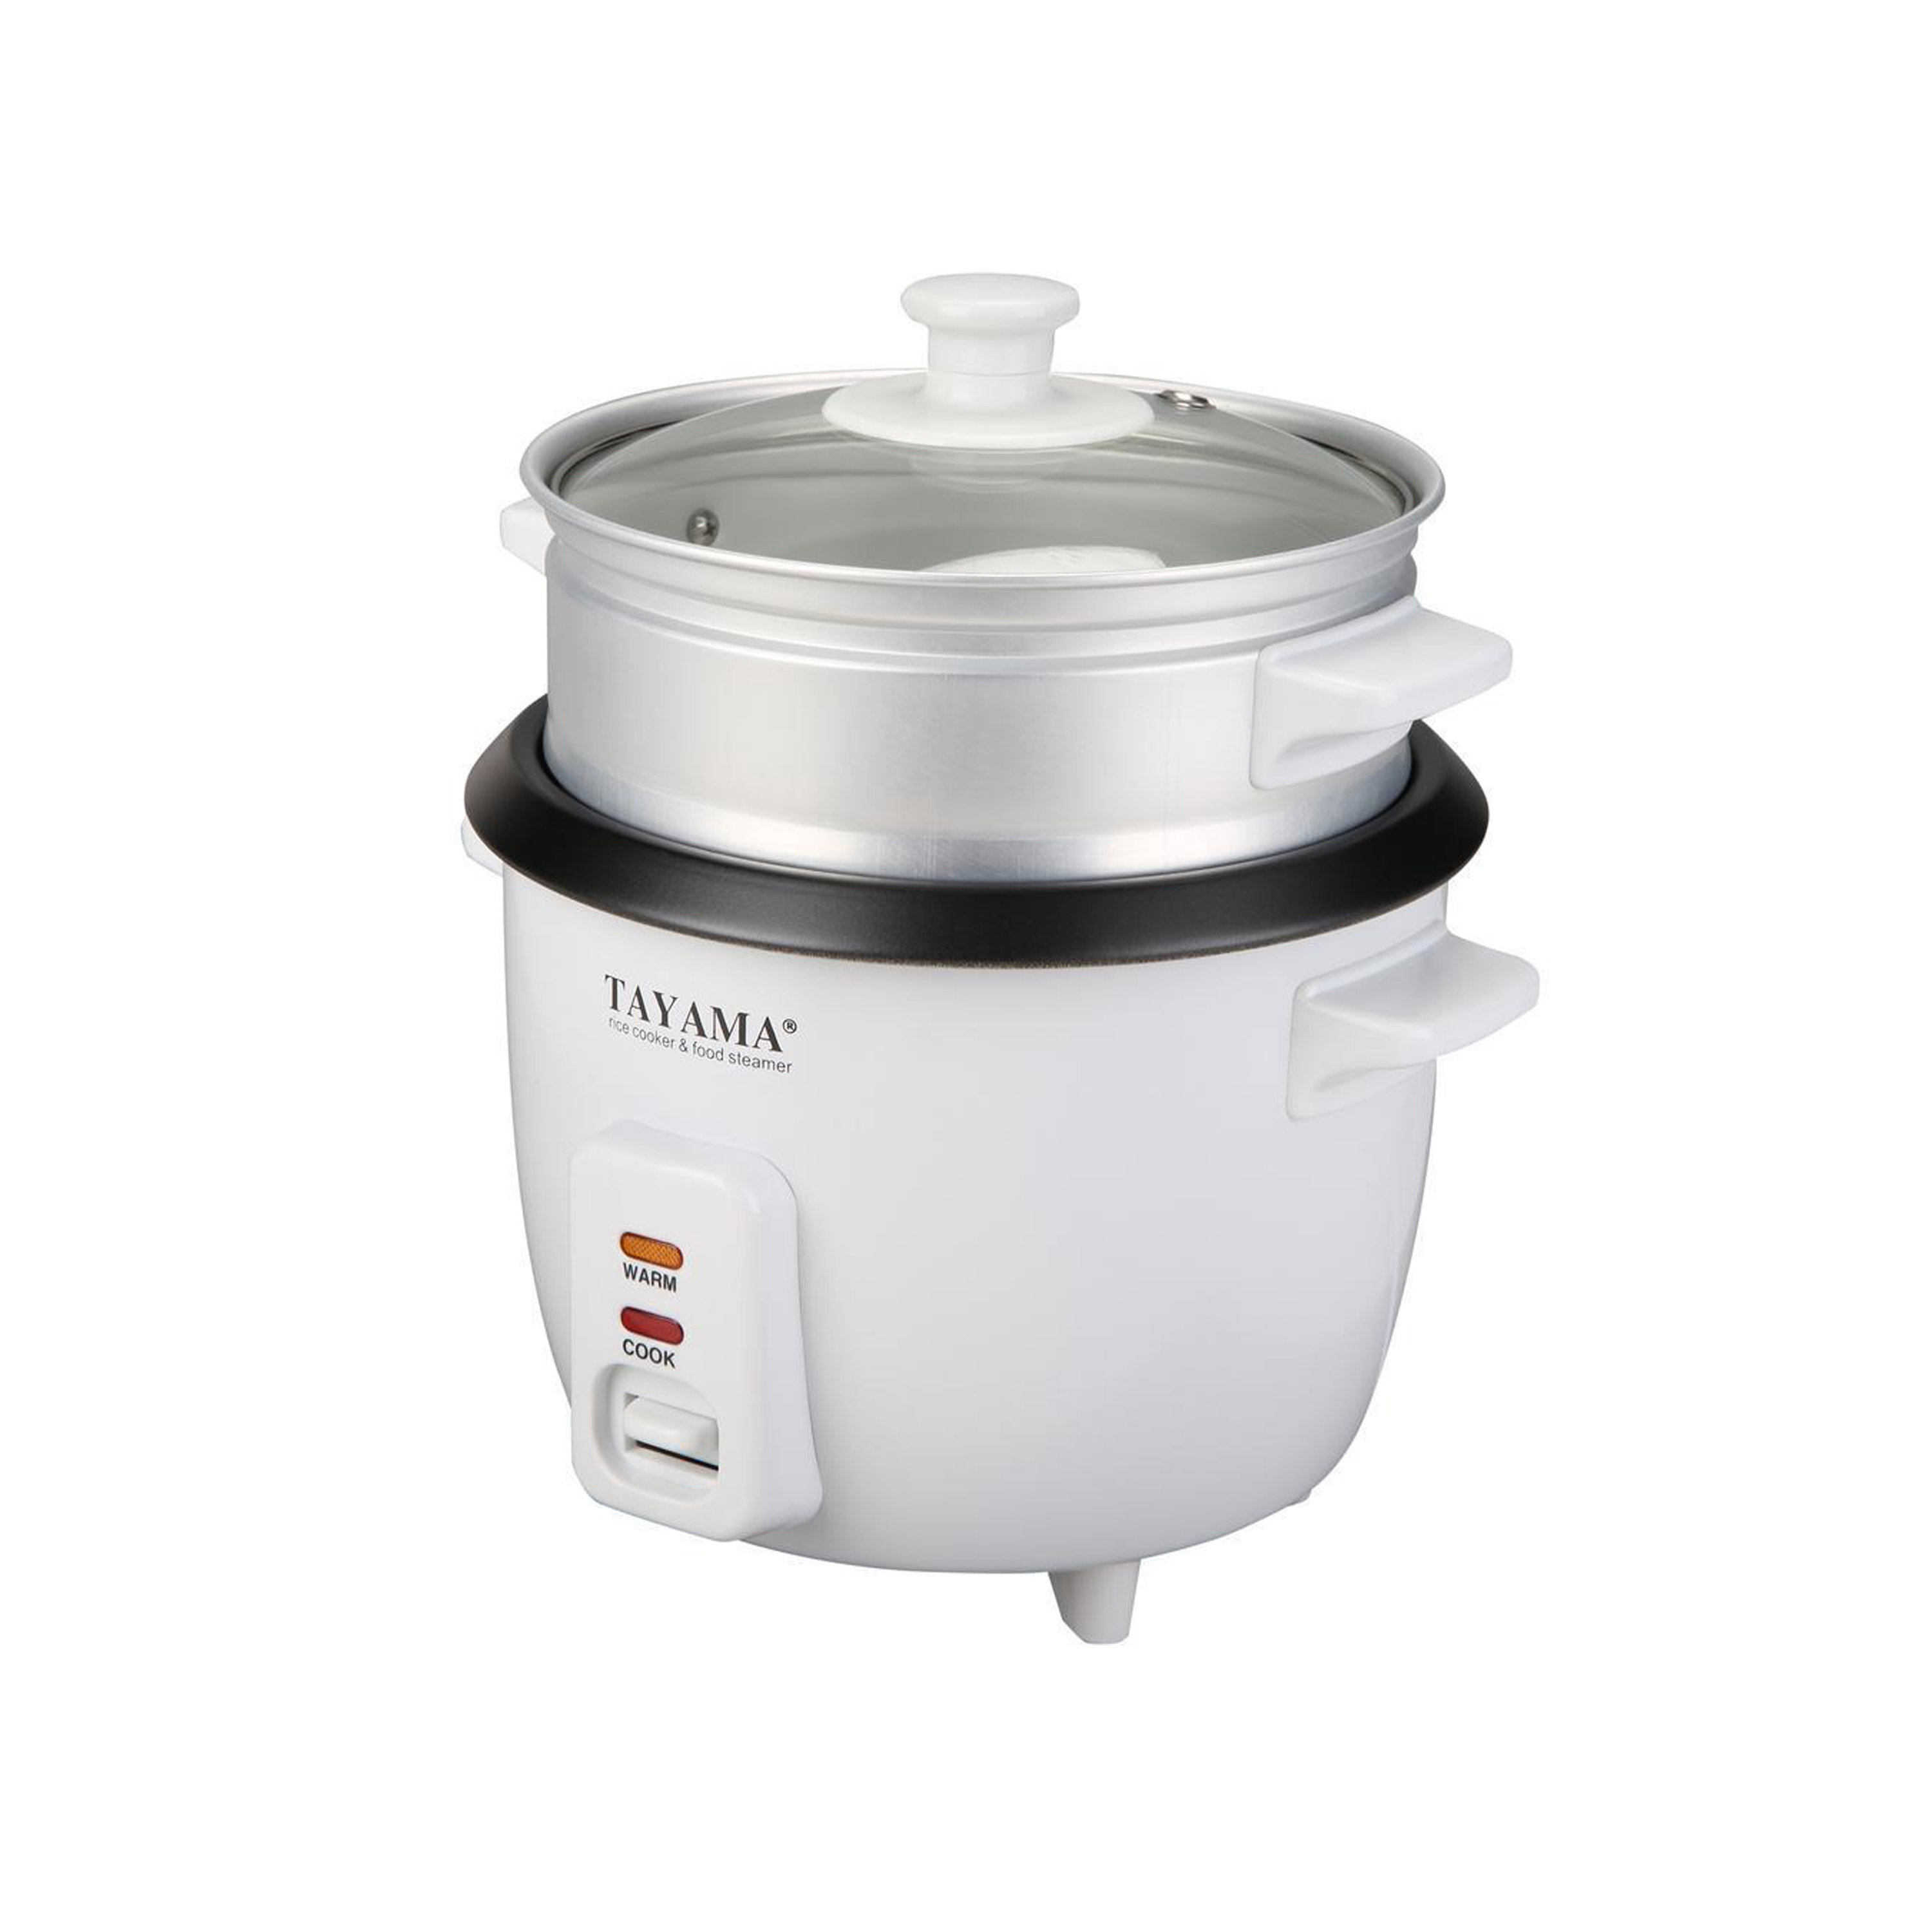 BLACK And DECKER RC503 Uncooked Rice Cooker Review 